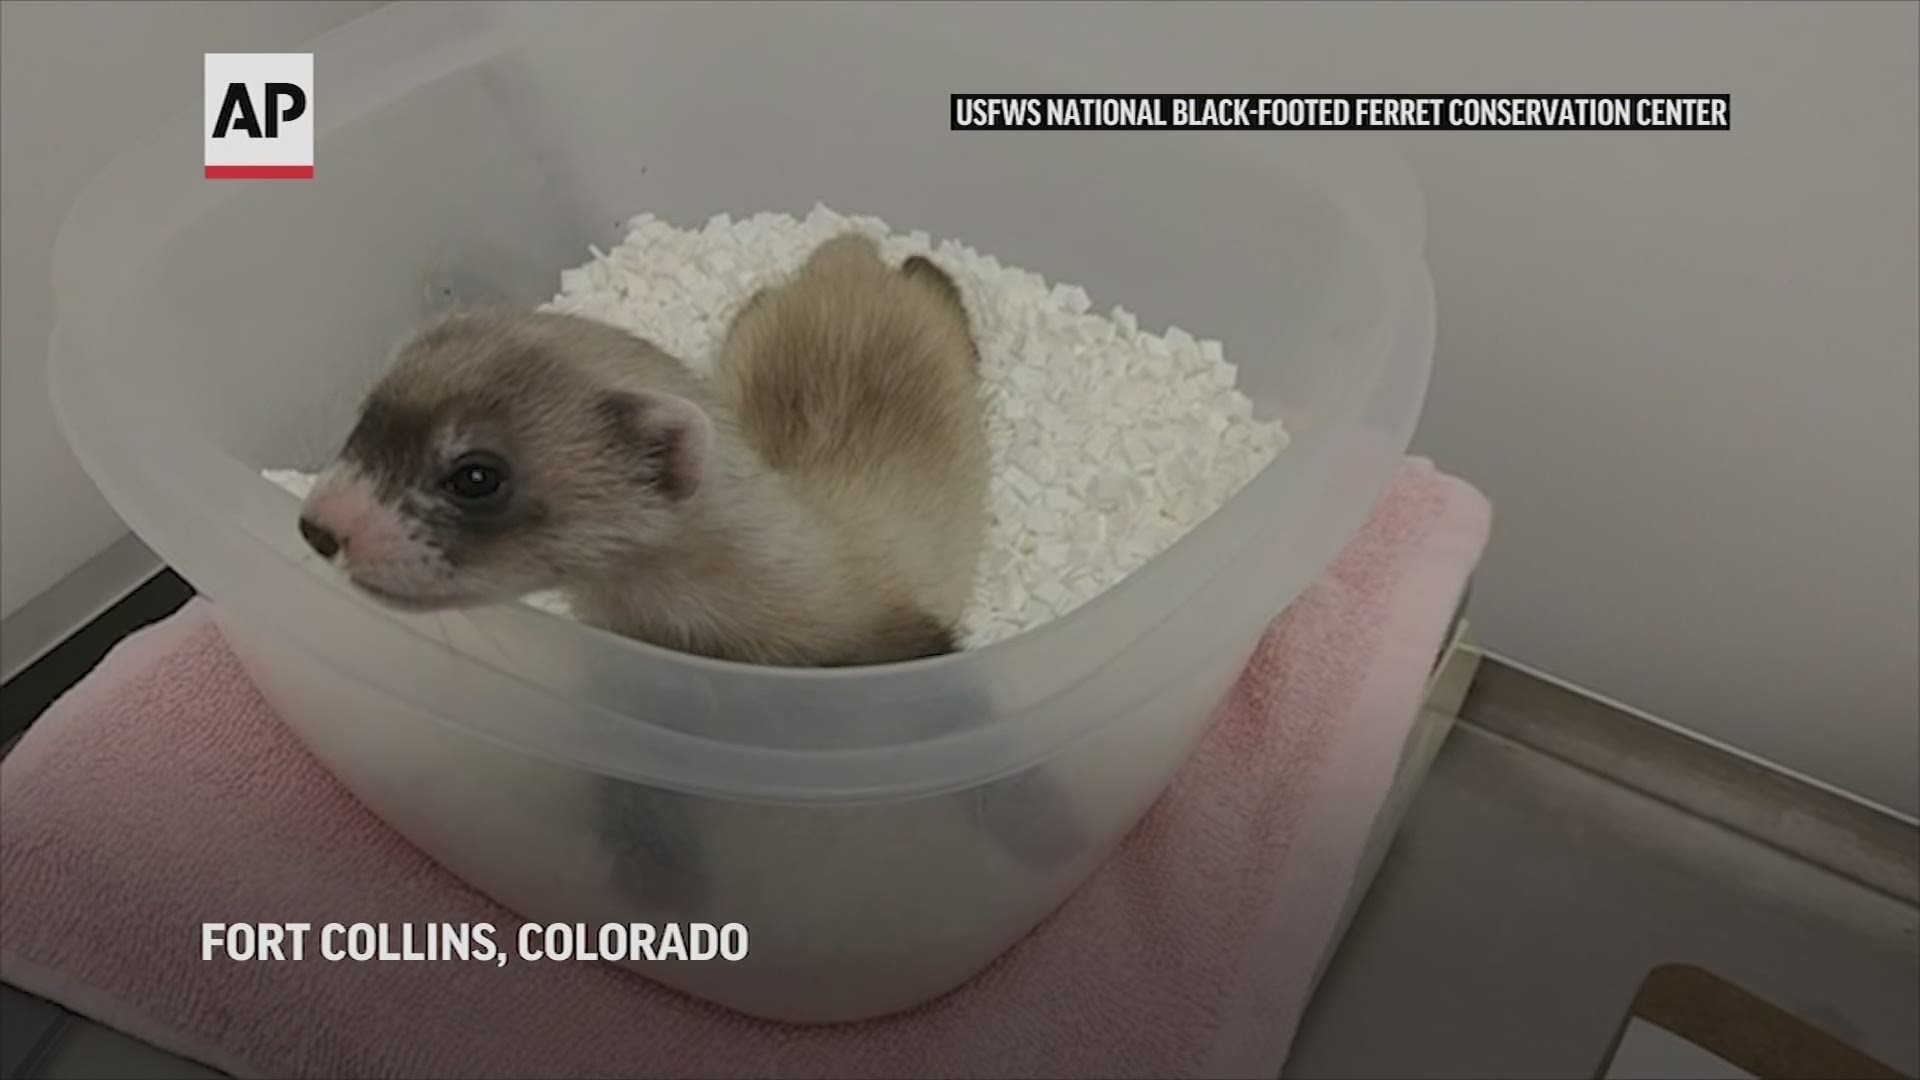 Endangered black-footed ferret is first US native cloned animal 